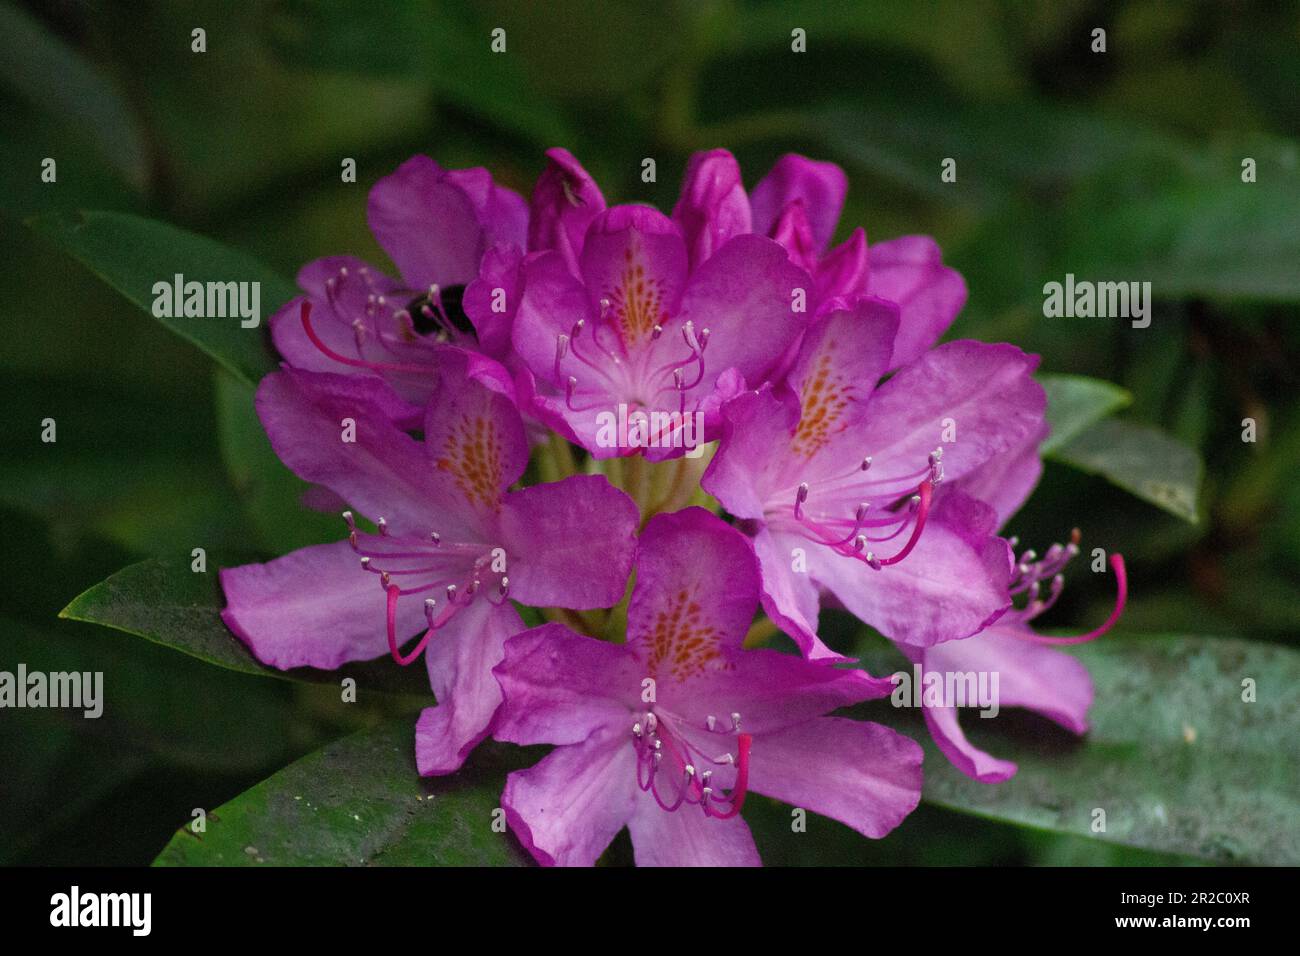 Pink Rhododendron flower, a bee is present in the image. Stock Photo